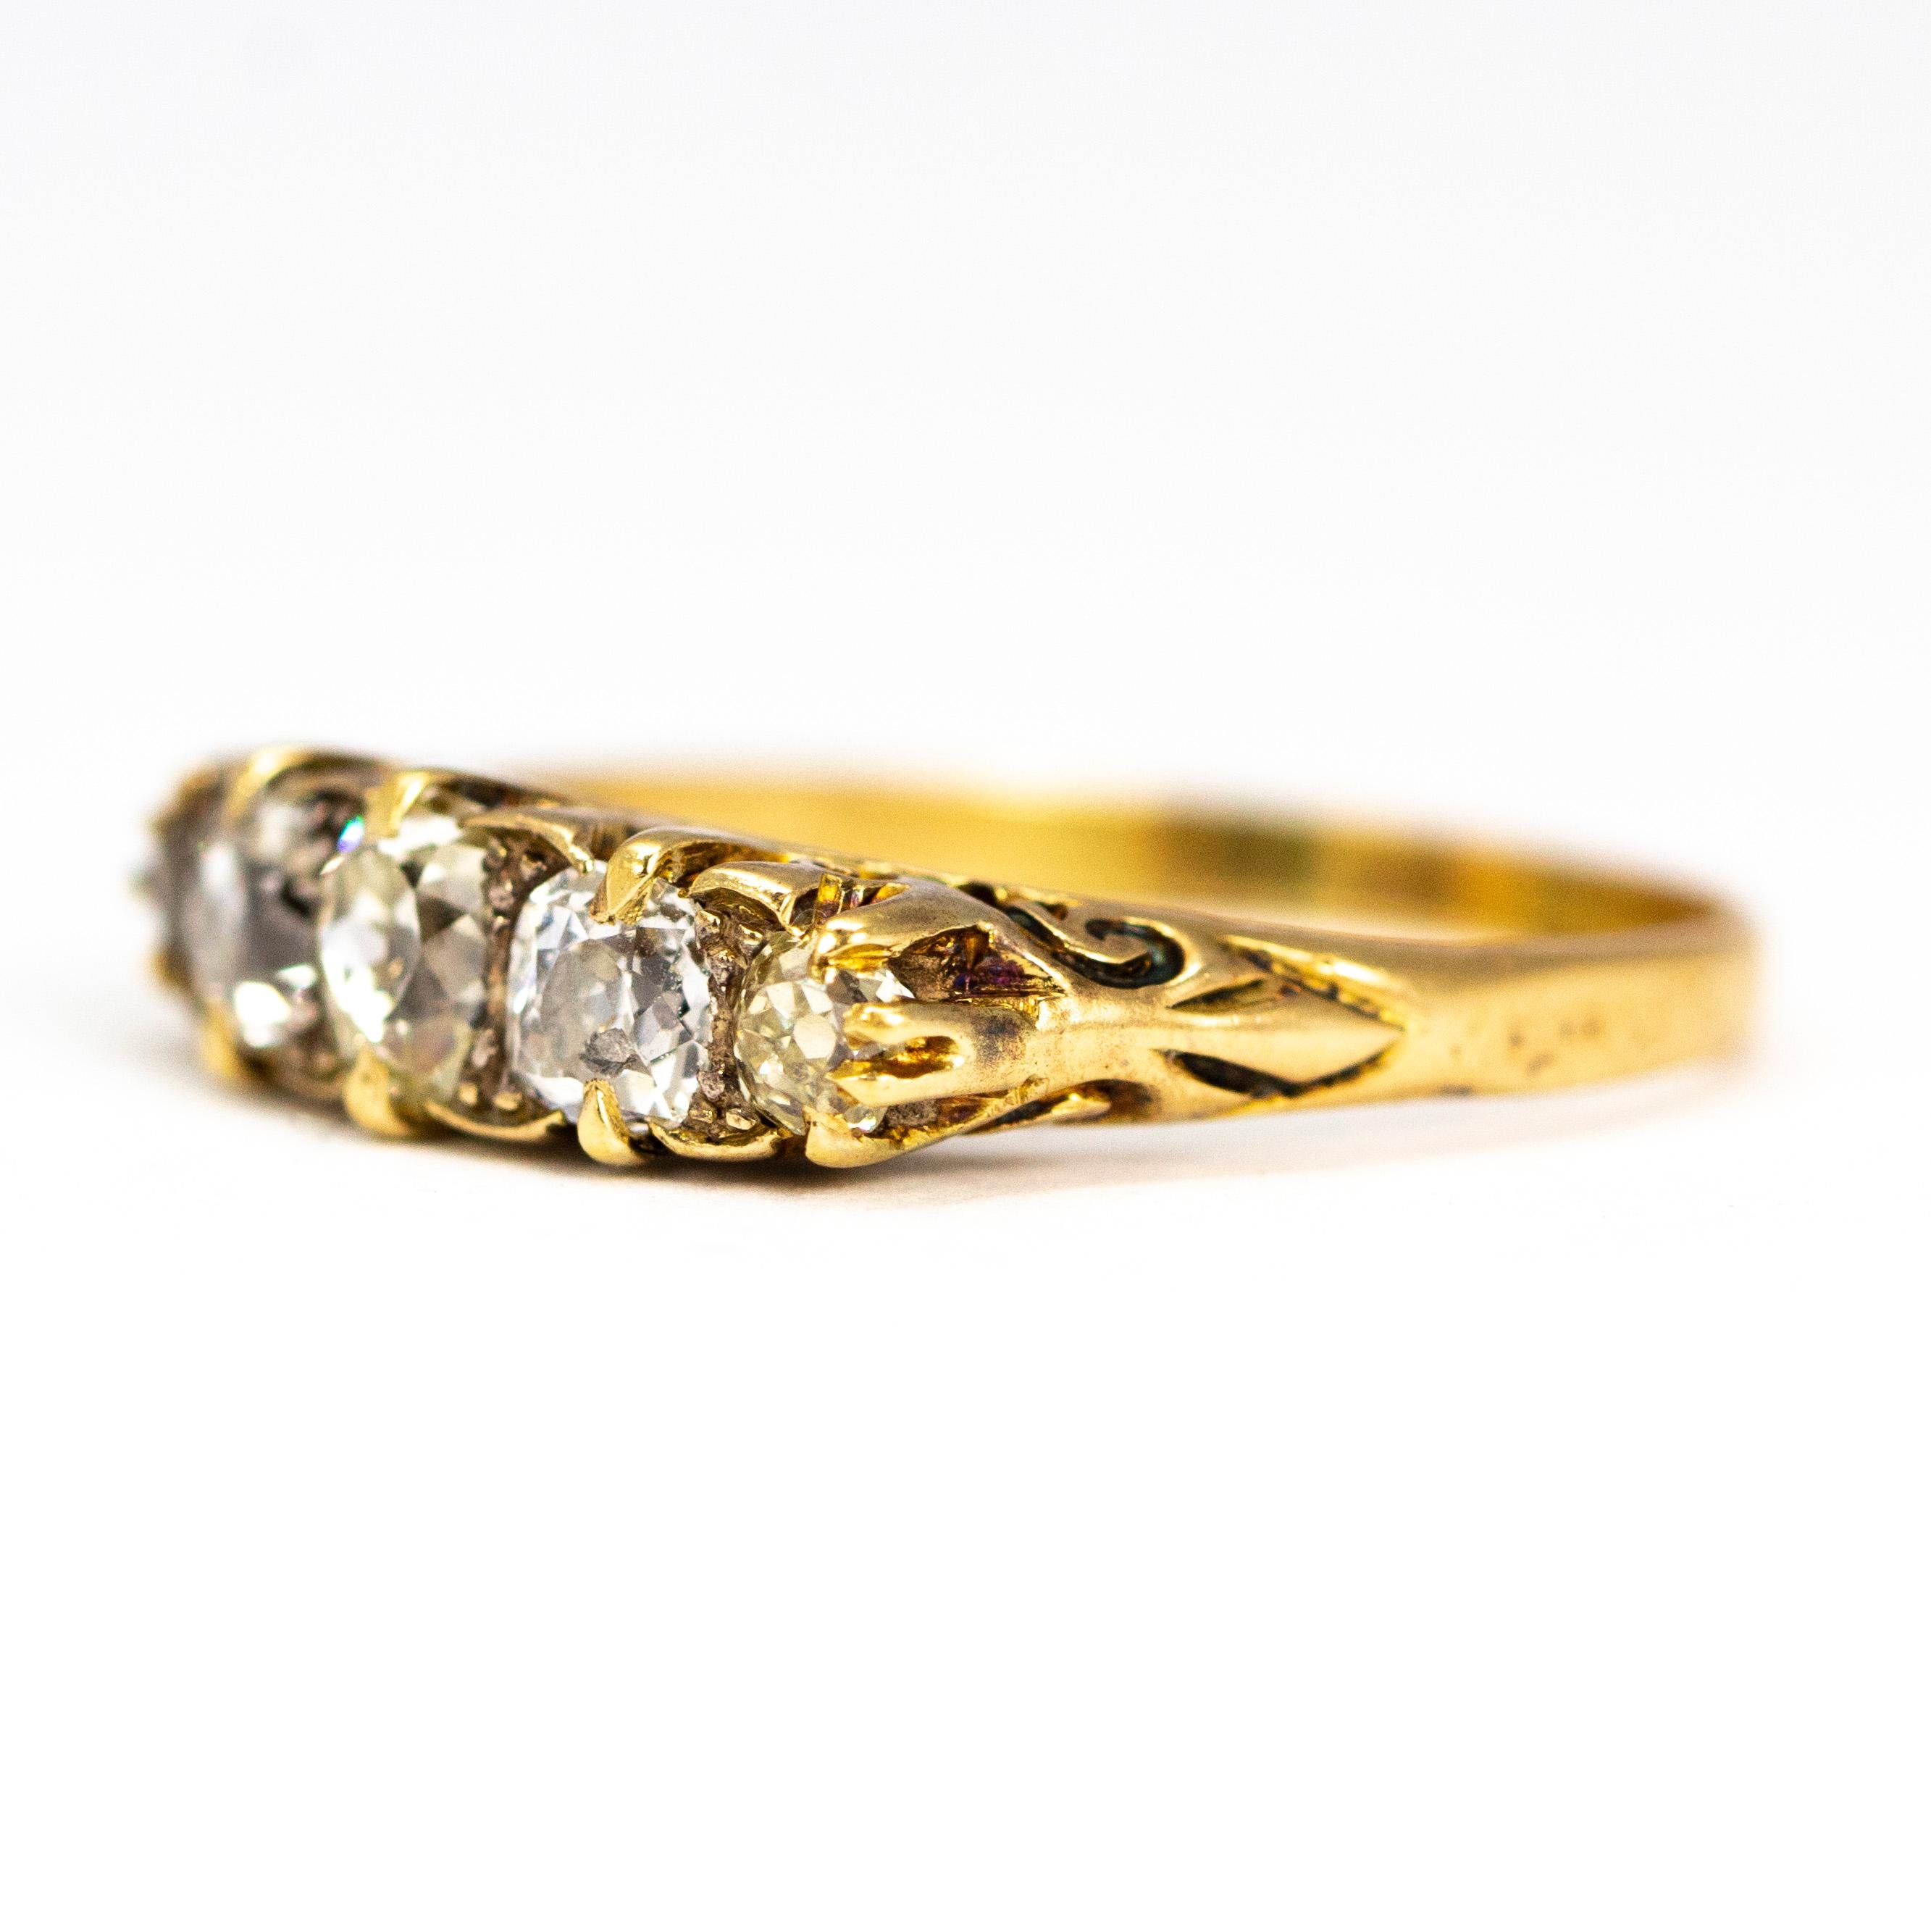 This ornate five stone ring shows off old cut diamonds totalling 1 carat. These stones are then wonderfully flattered within a beautifully delicate carved shank.

This handmade mount uses 18 carat Yellow Gold to compliment the craftsmanship of this